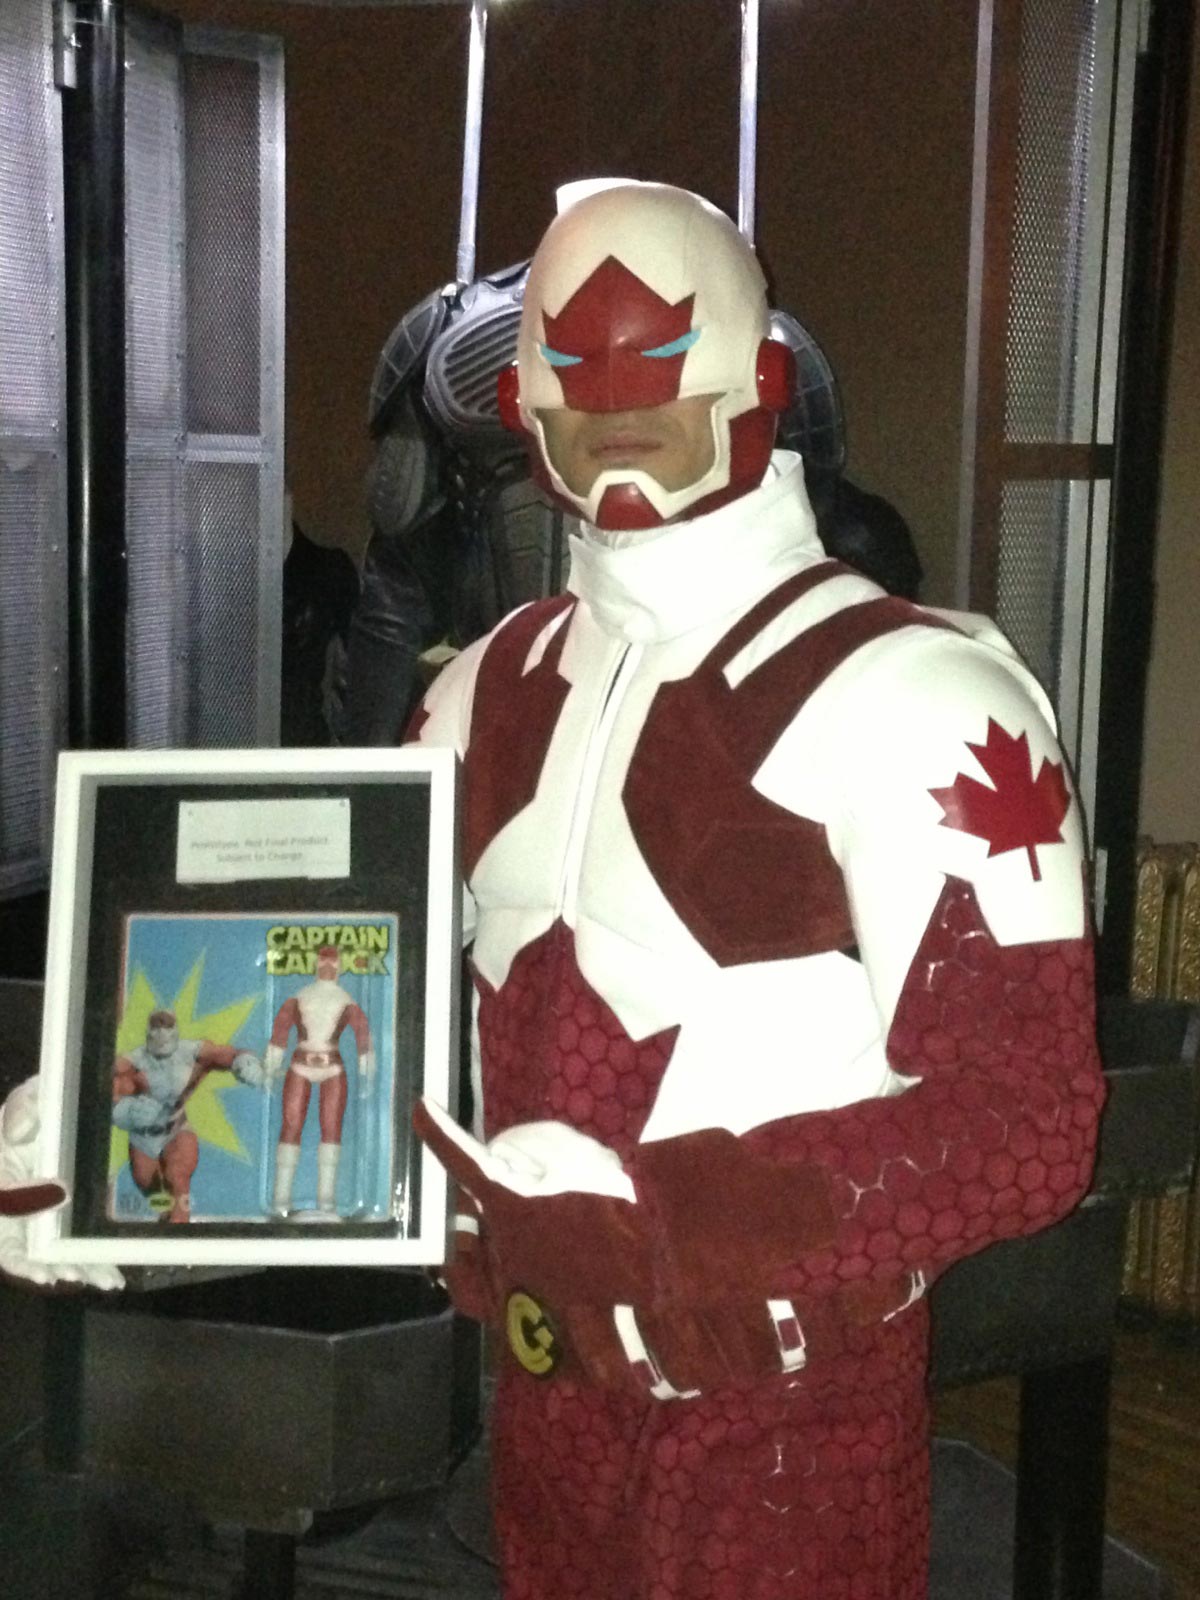 Captain Canuck and the upcoming 8 inch action figure from Odeon Toys.